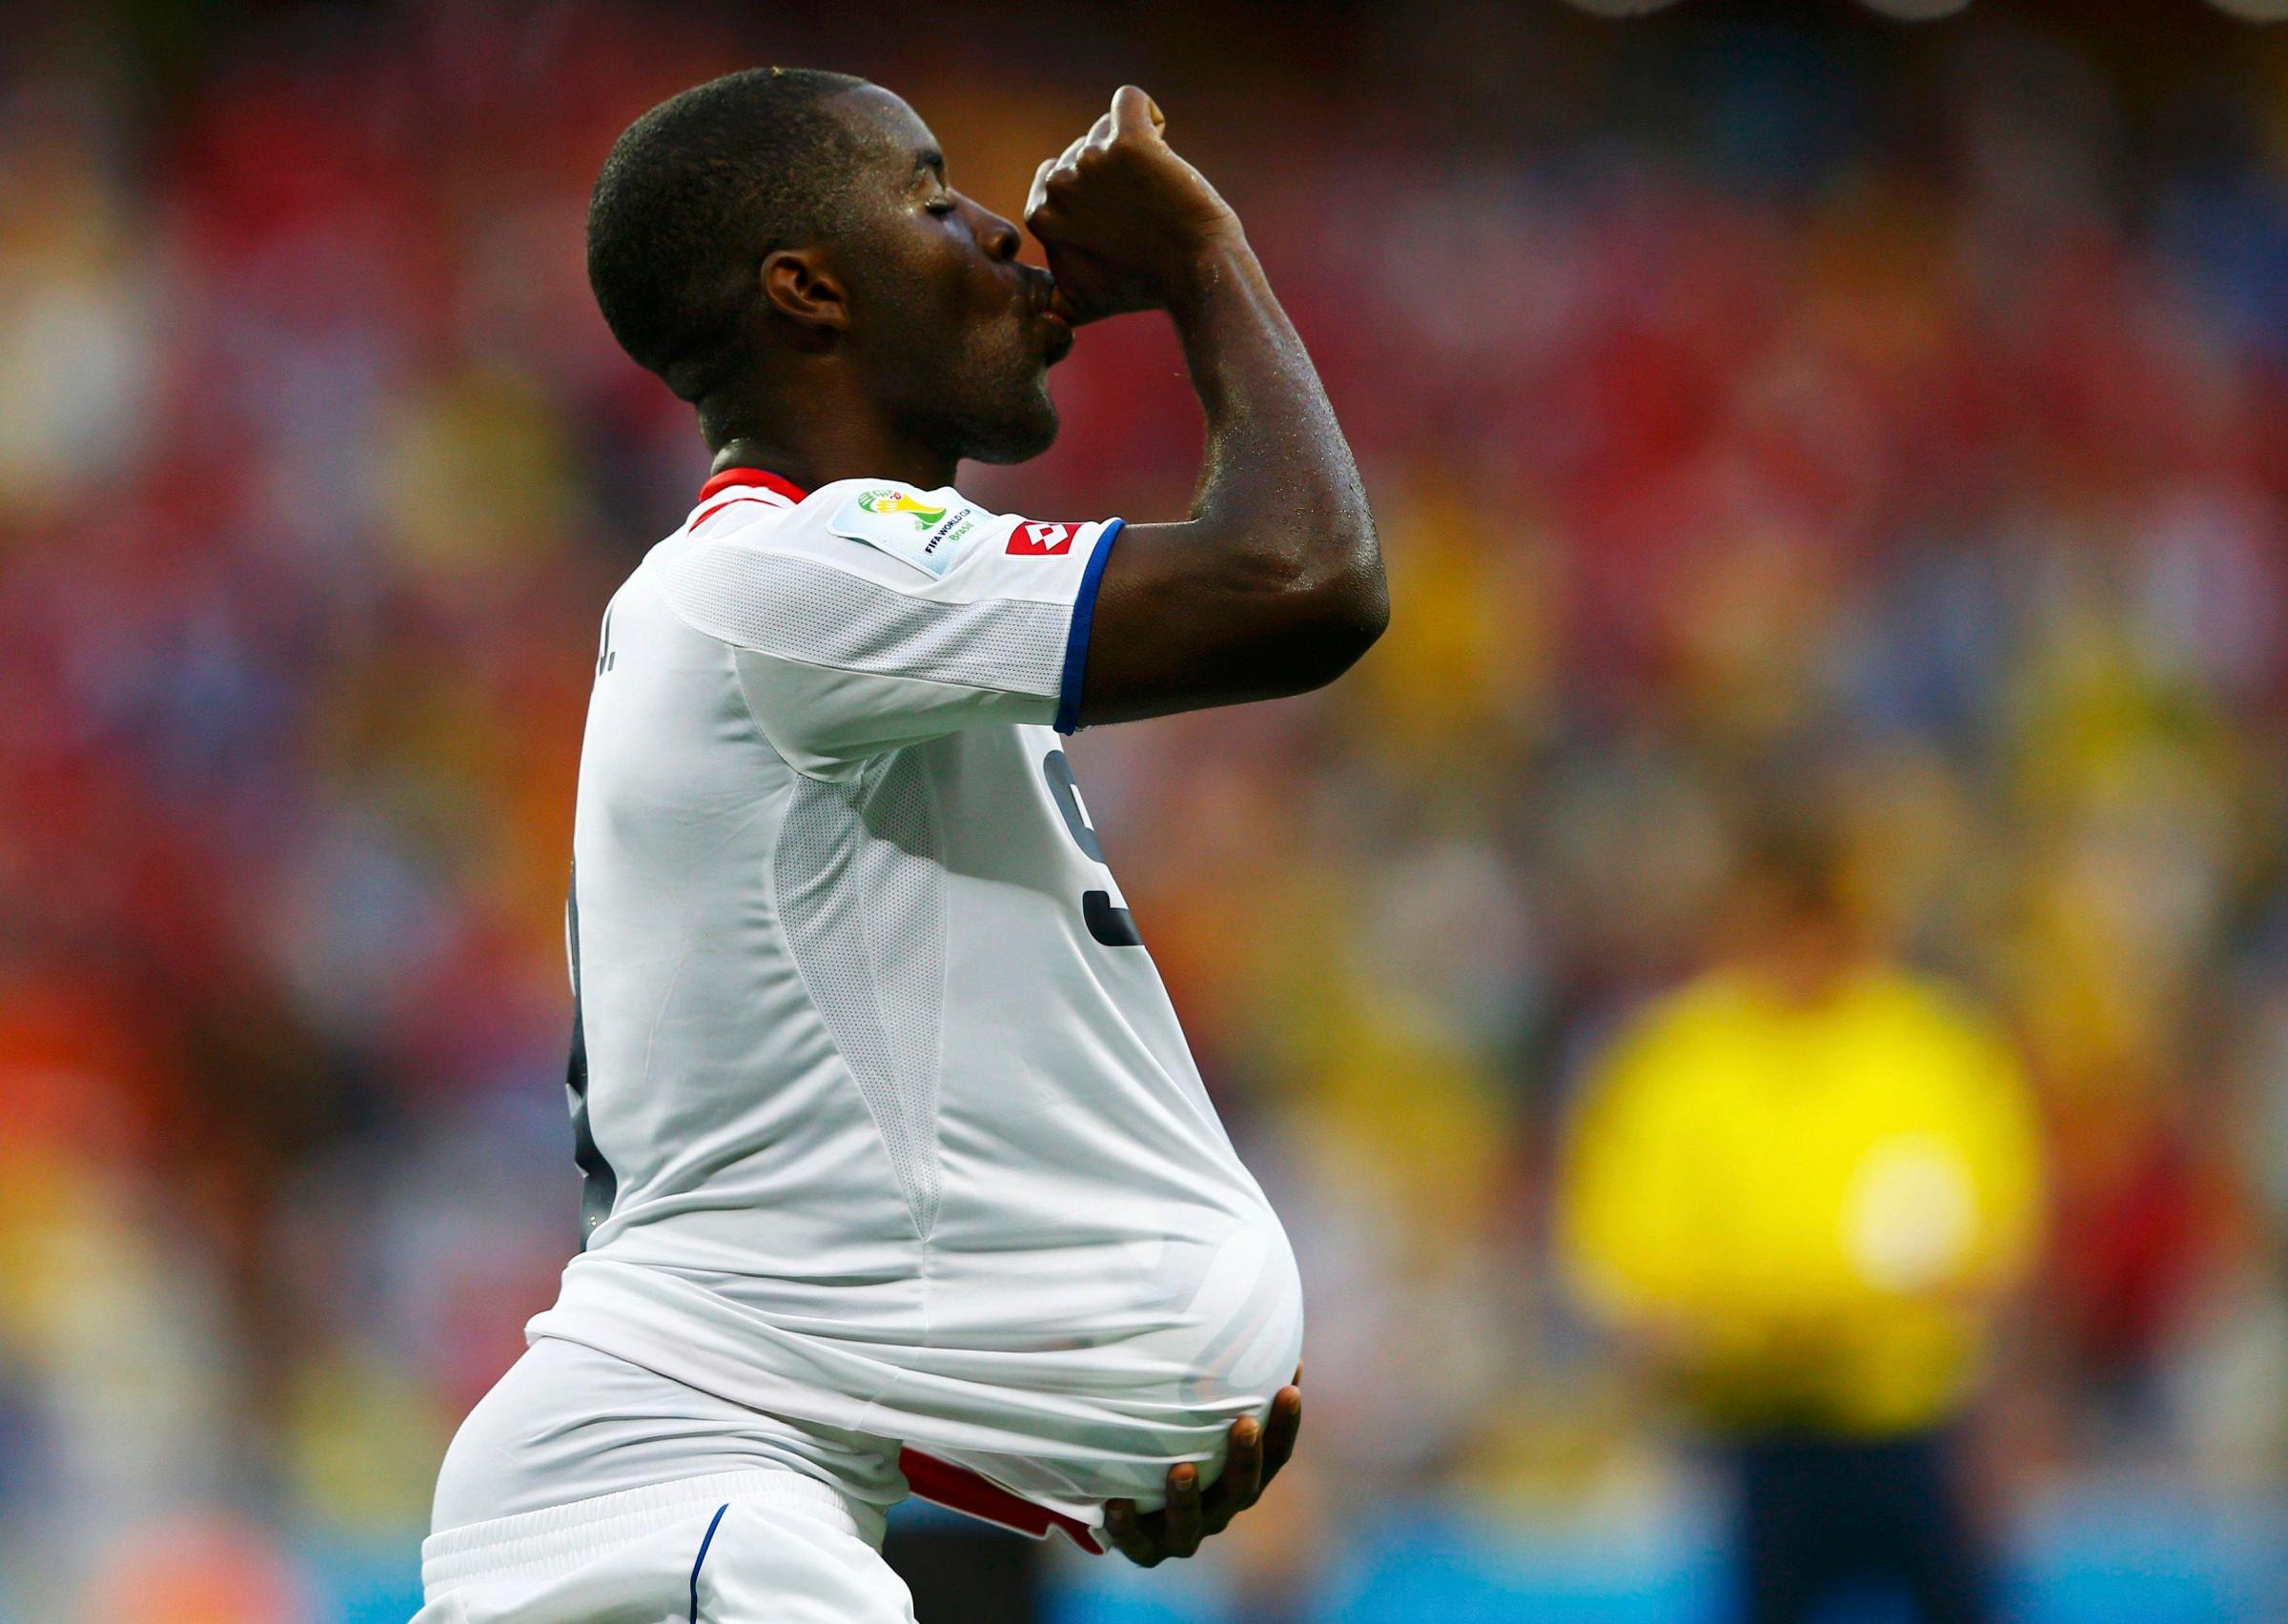 Costa Rica's Joel Campbell celebrates with the match ball after scoring against Uruguay during their 2014 World Cup Group D soccer match at the Castelao stadium in Fortaleza on June 14, 2014.